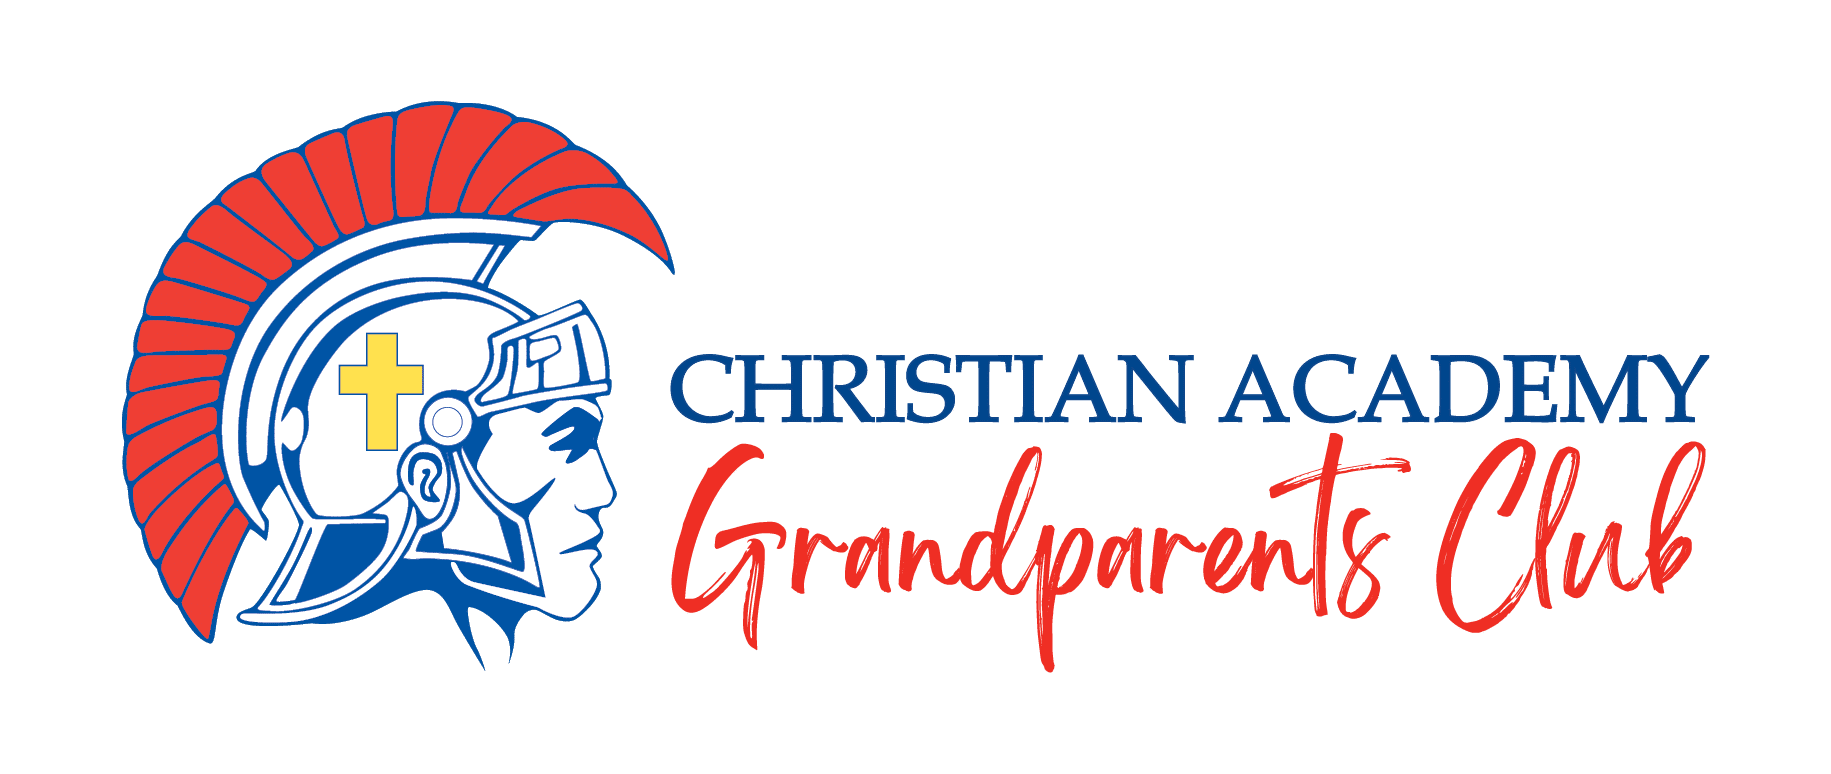 Christian Academy School System | Christian Academy of Louisville | English Station Campus | Grandparents Club